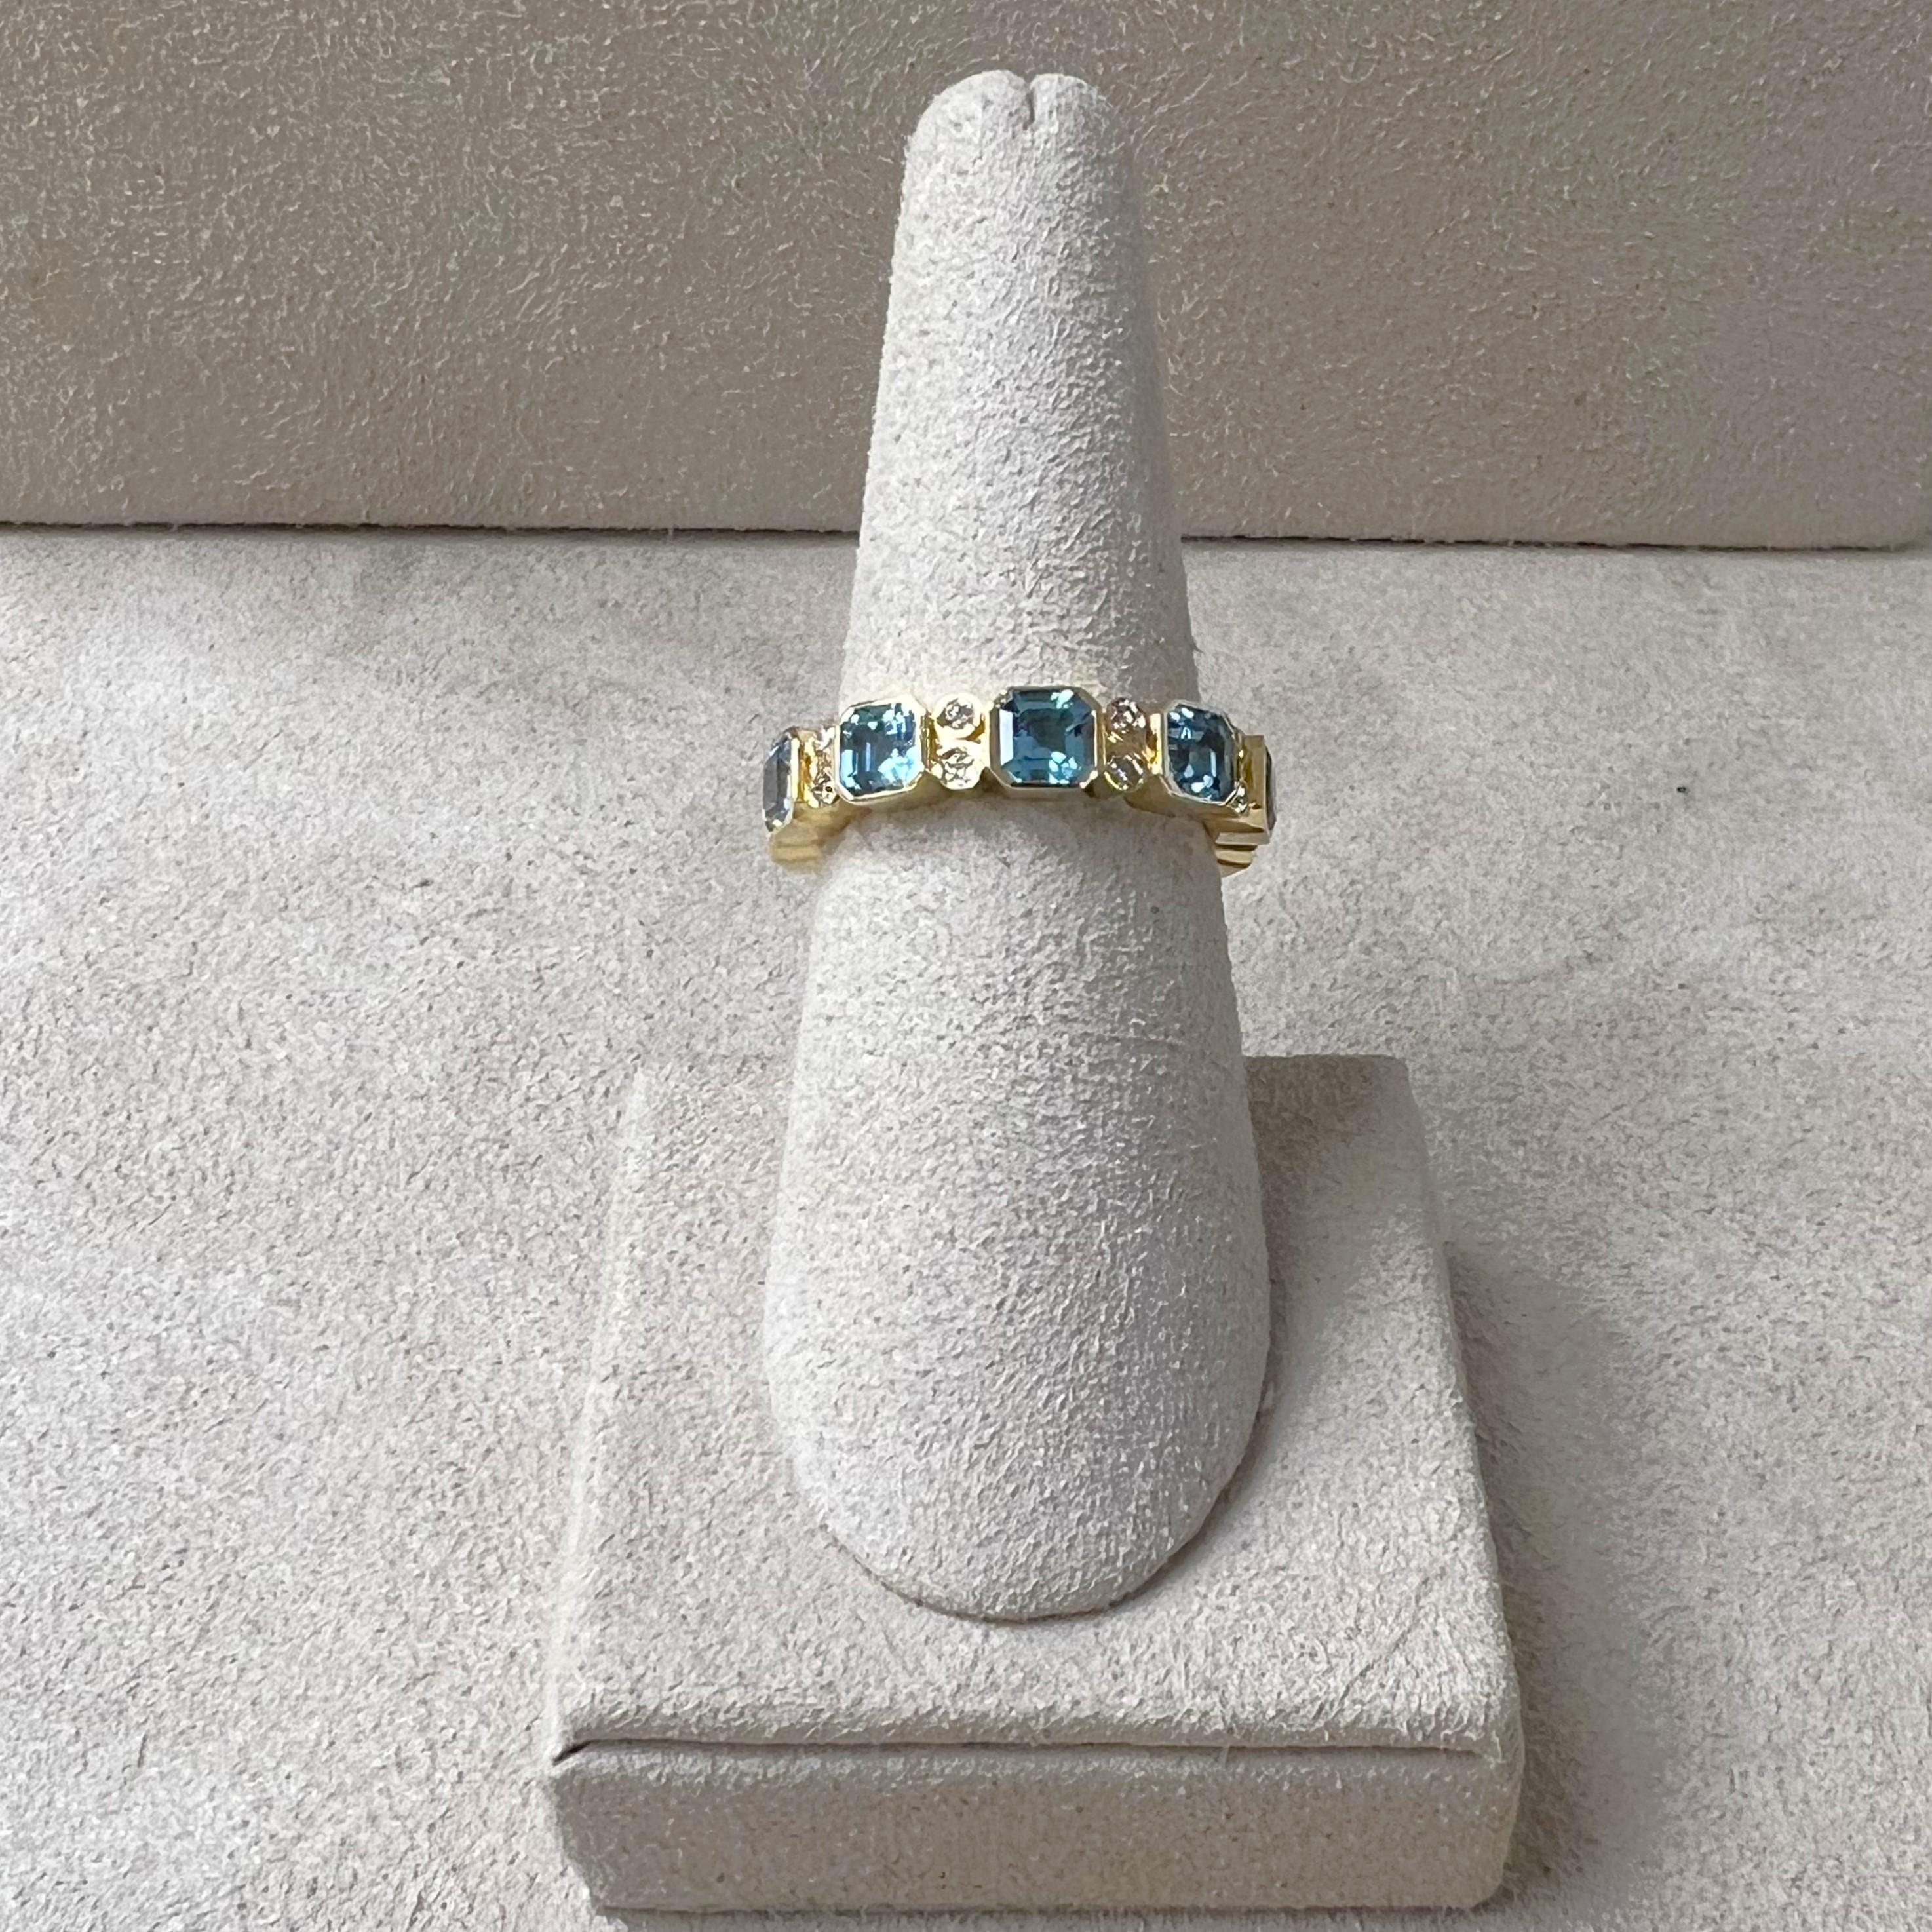 Created in 18 karat yellow gold
Blue topaz 2.50 carats approx.
Diamonds 0.20 carat approx.
Ring size US 7, can be sized
Limited edition

Skilfully crafted from 18 karat yellow gold, this limited edition ring features a 2.50 blue topaz gemstone and